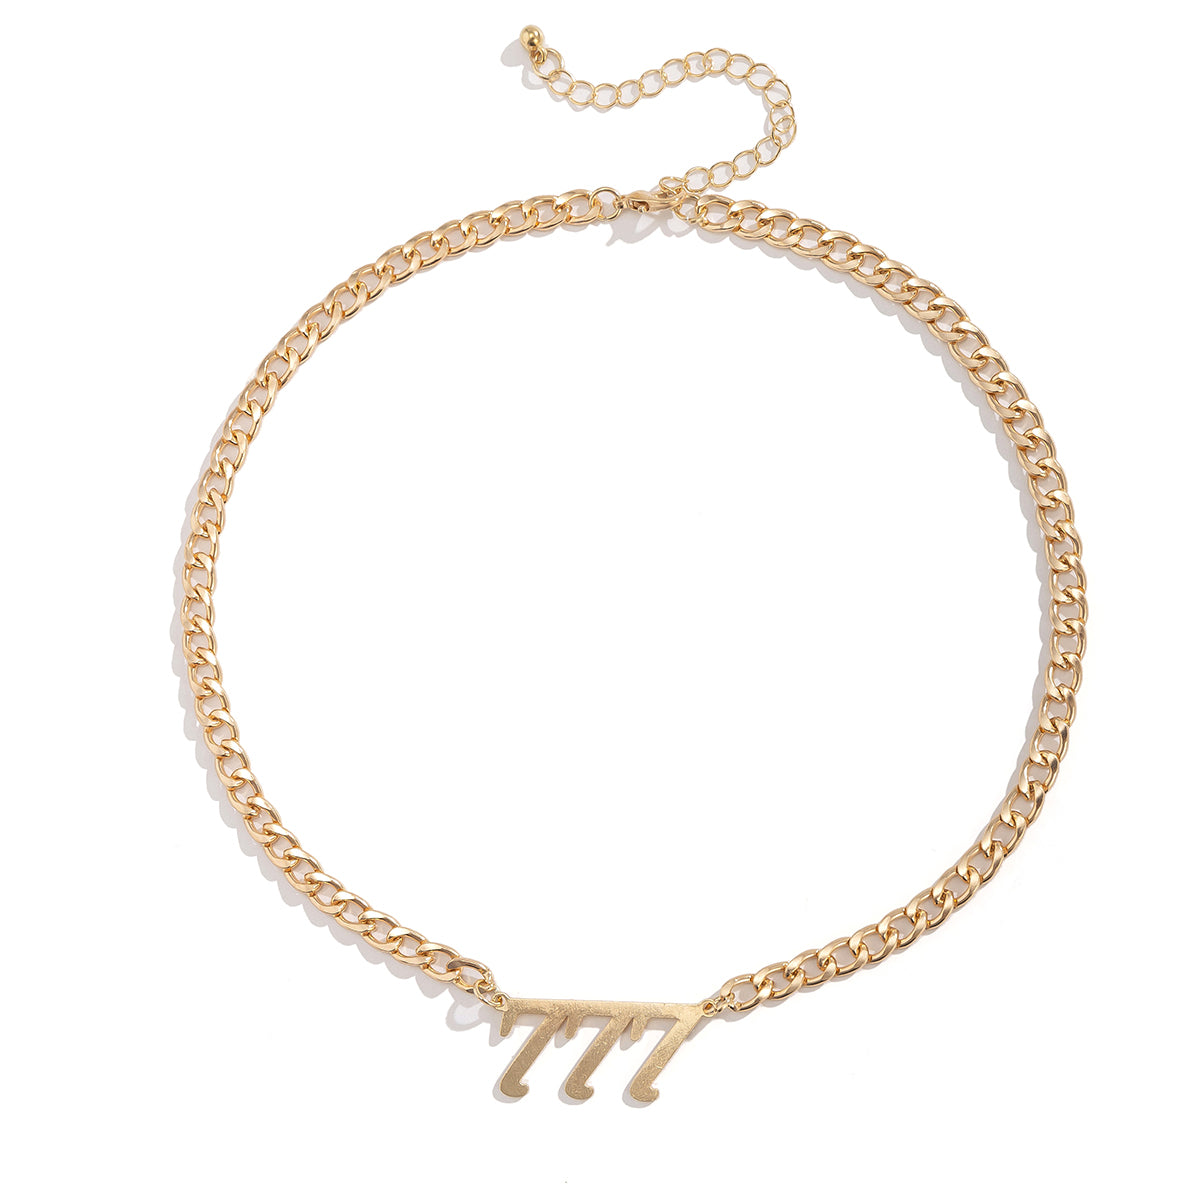 18K Gold-Plated '777' Curb Chain Pendant Necklace